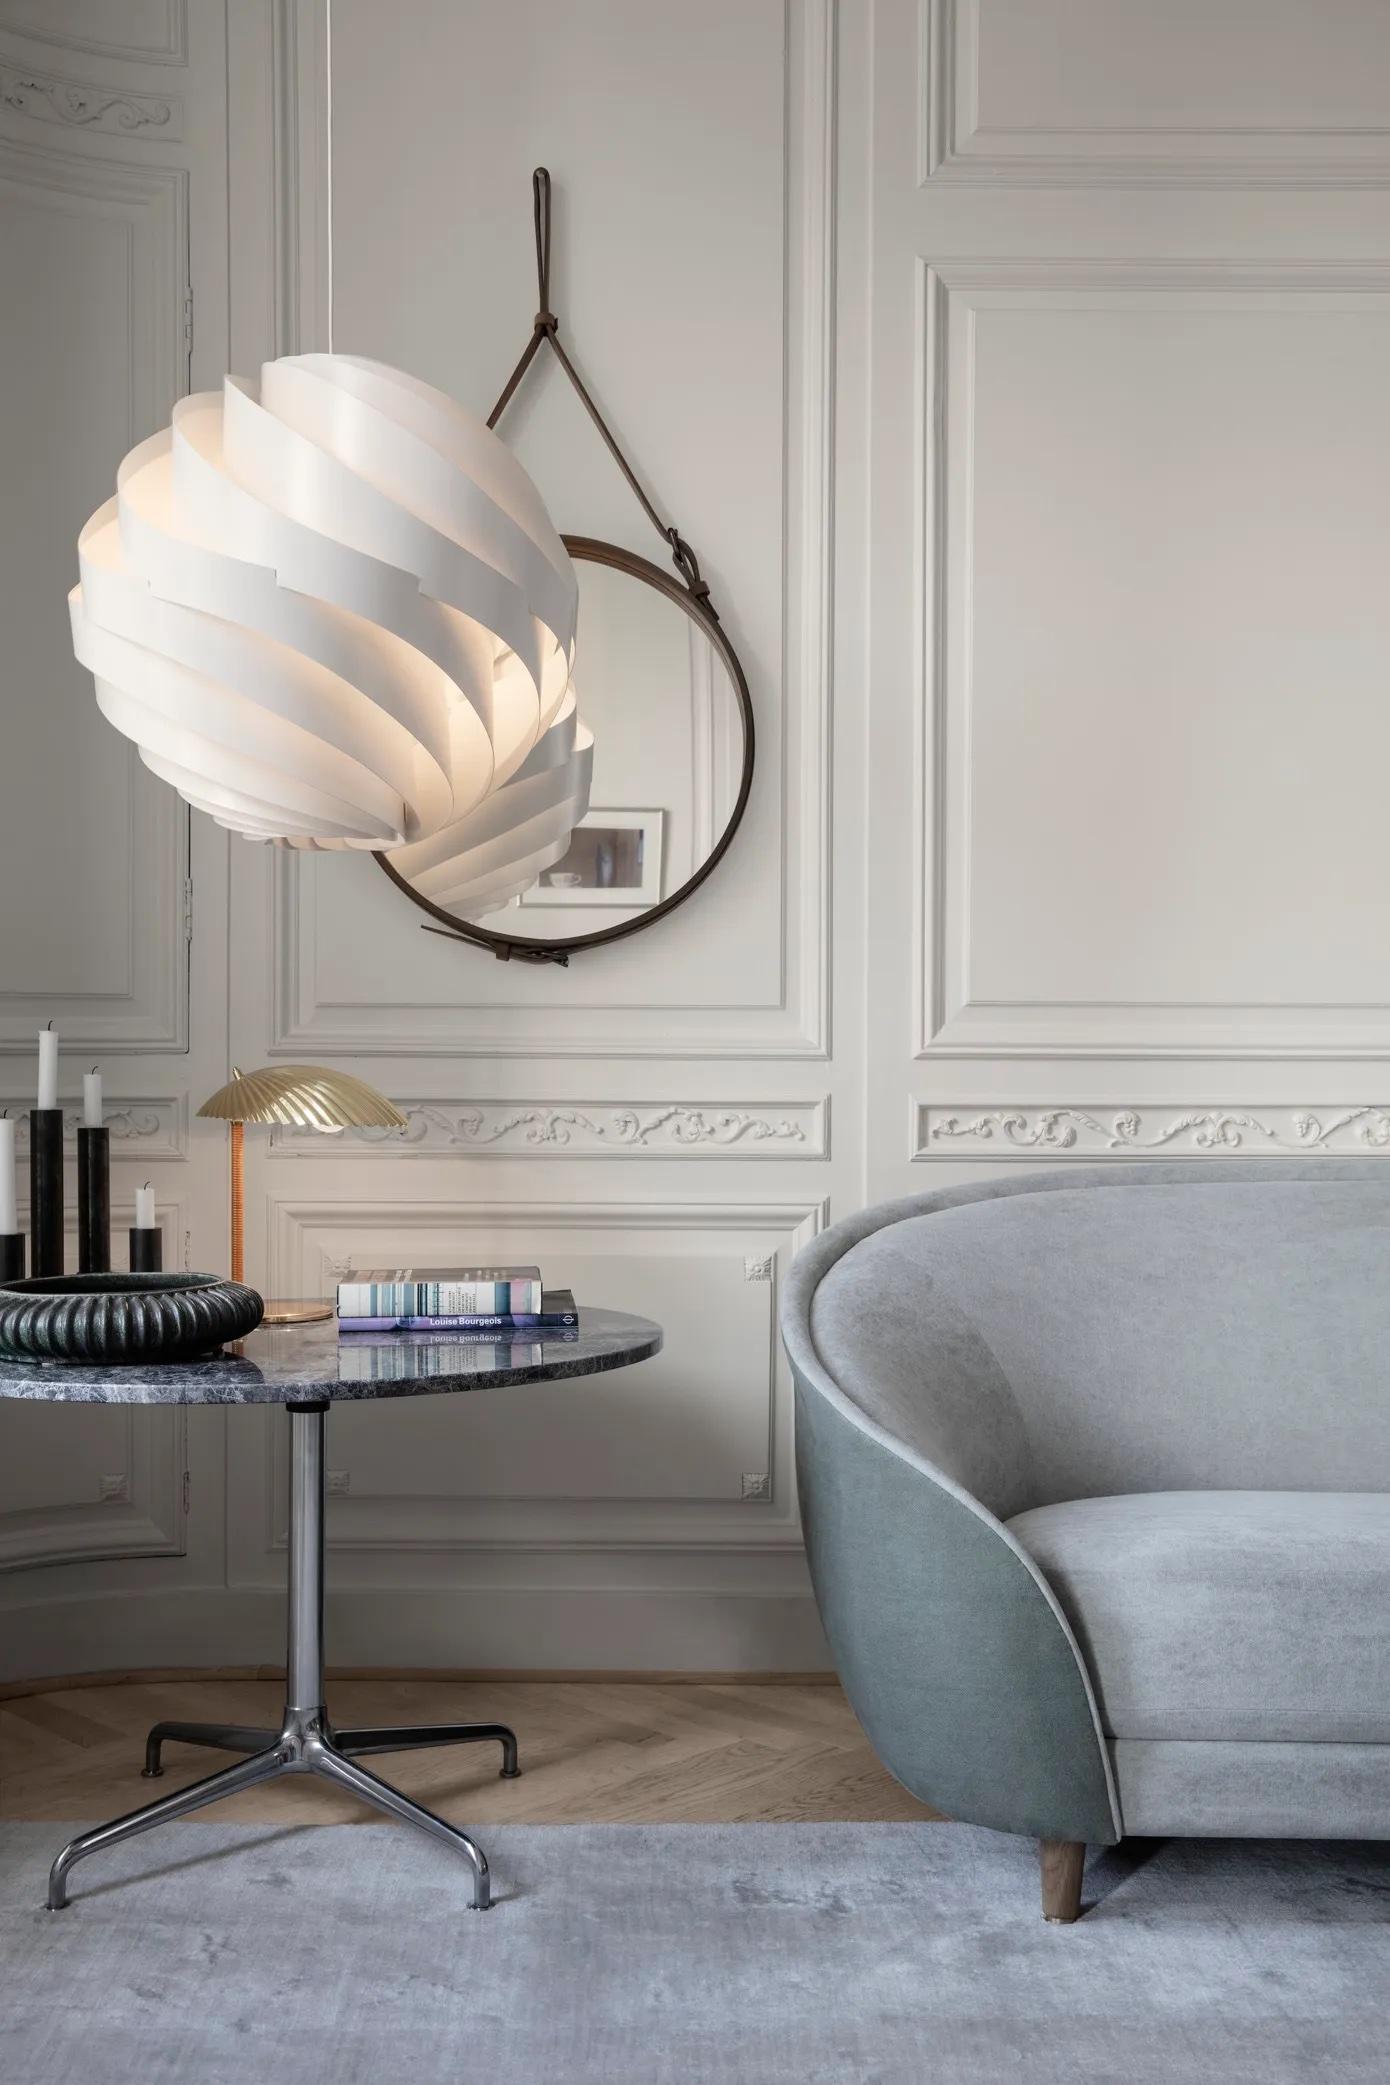 Paavo Tynell’s fanciful take on nature is gracefully echoed in the 5321 Table Lamp, designed by the Finnish designer in 1941. Under the distinctive shell inspired brass shade, the bulb subtly appears from beneath; a picturesque detail resembling the